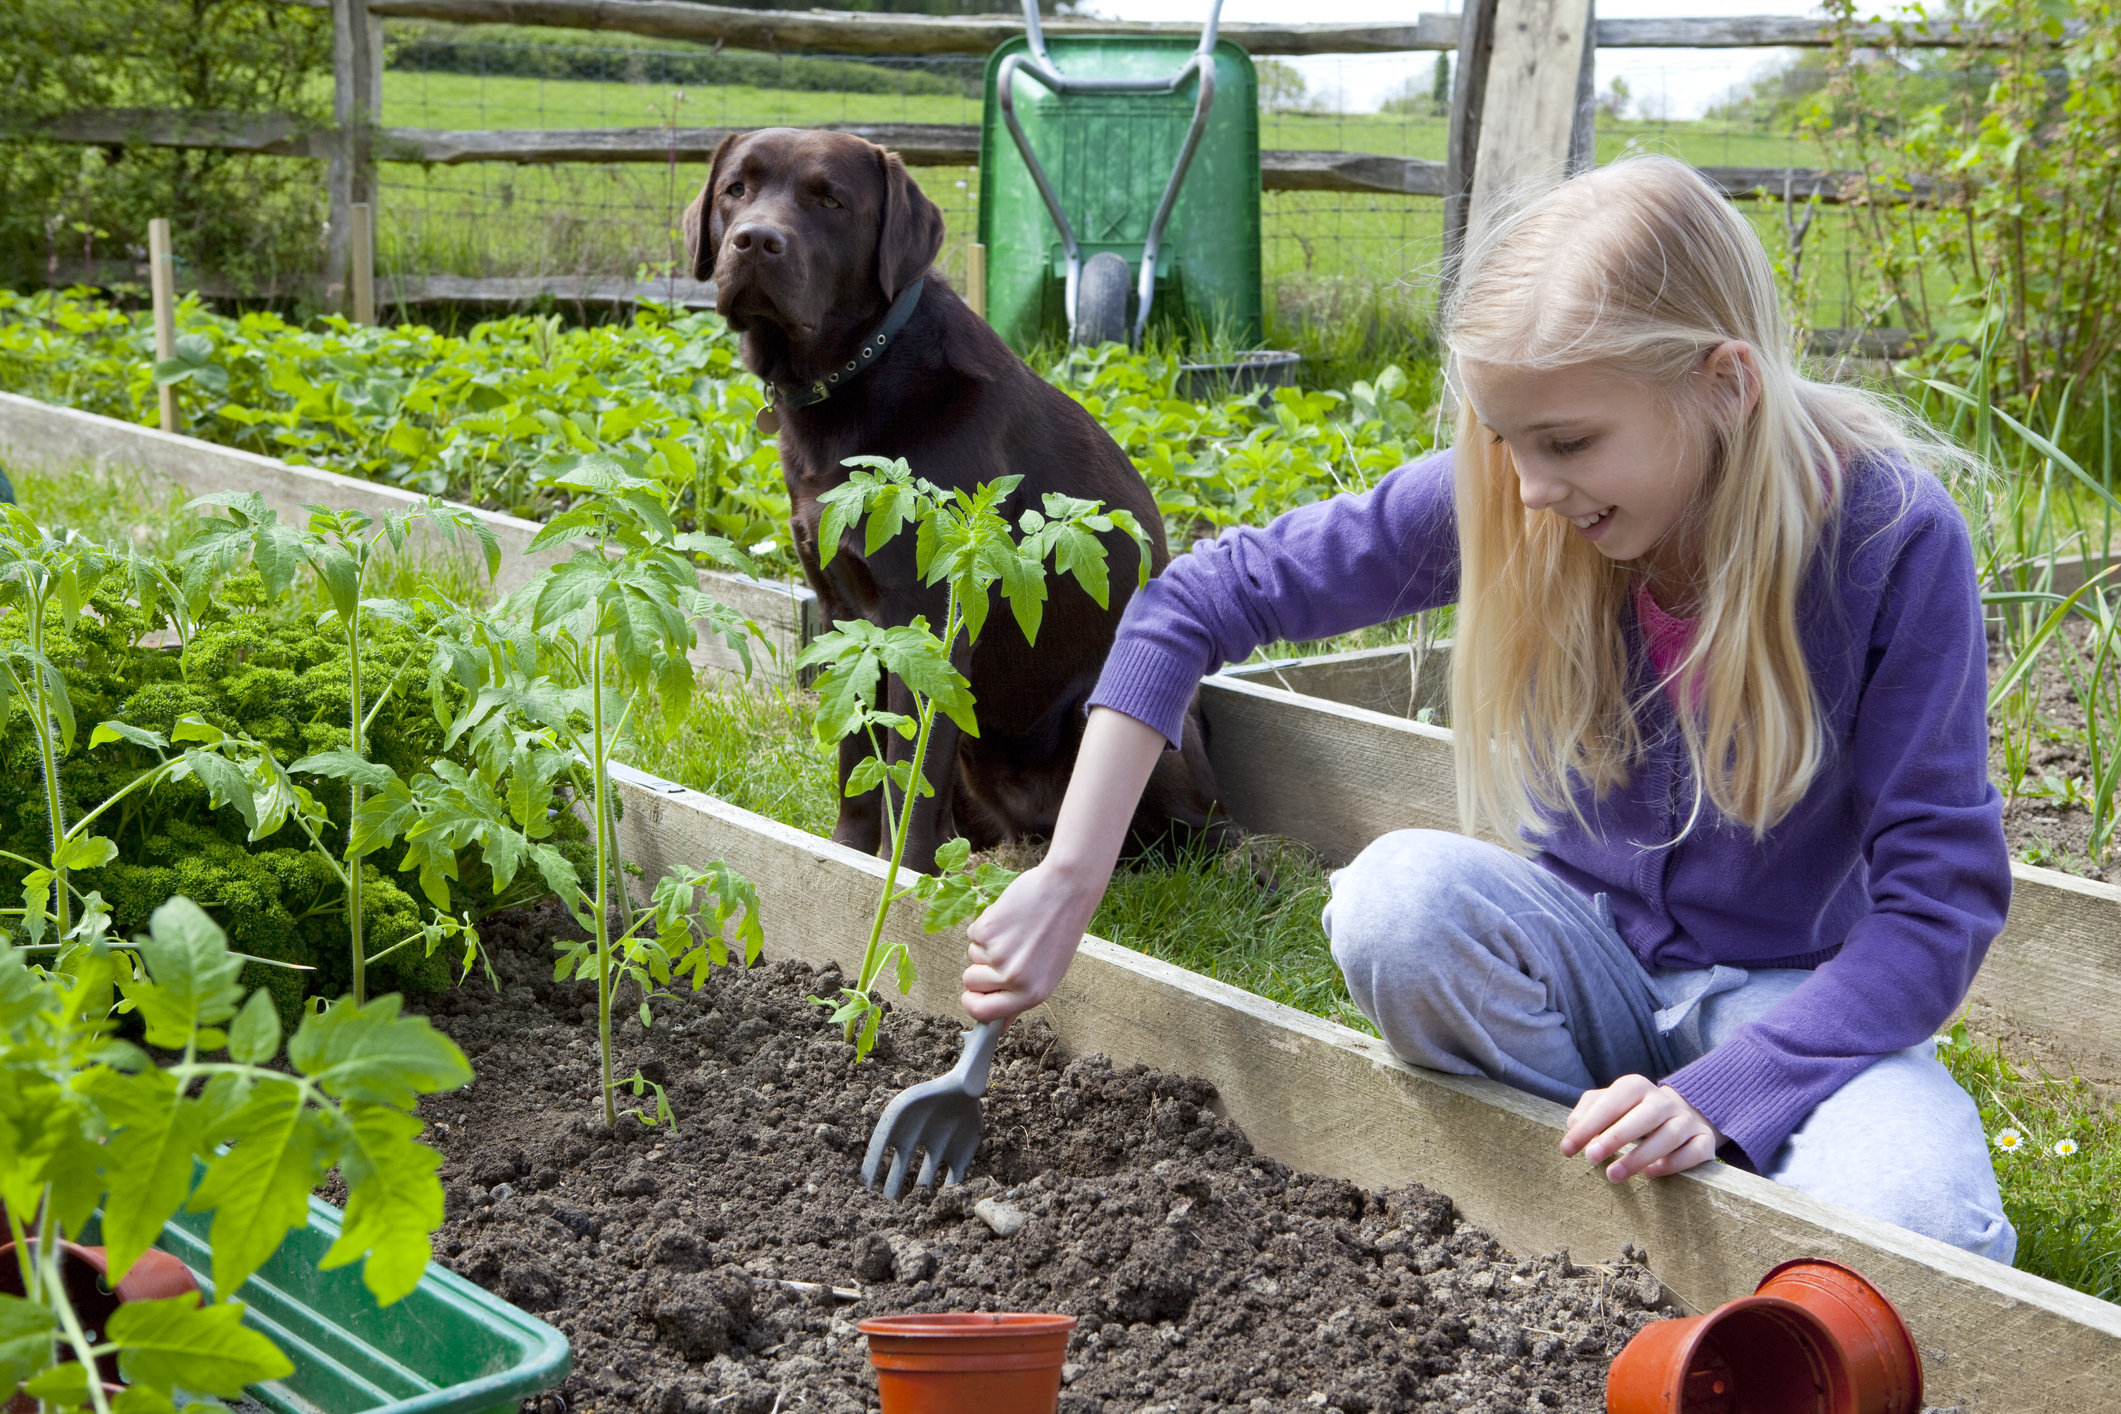 A chocolate lab sits by the vegetable garden while a young girl digs